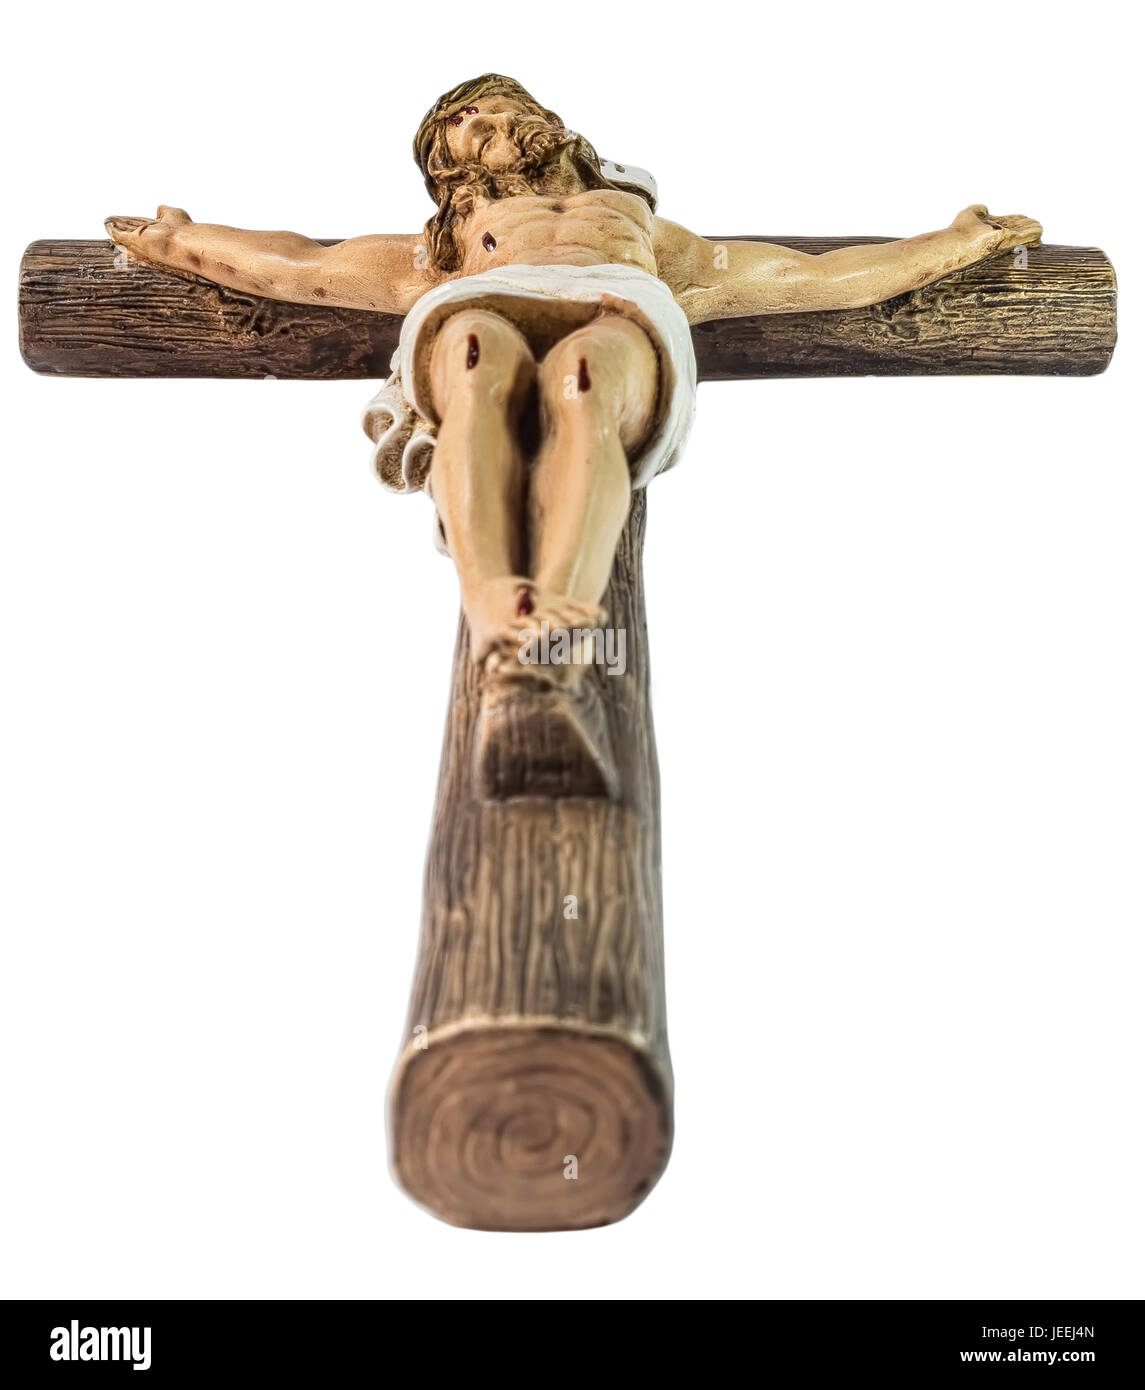 closeup of jesus crucified on the cross. Image shows the cross from below  Stock Photo - Alamy